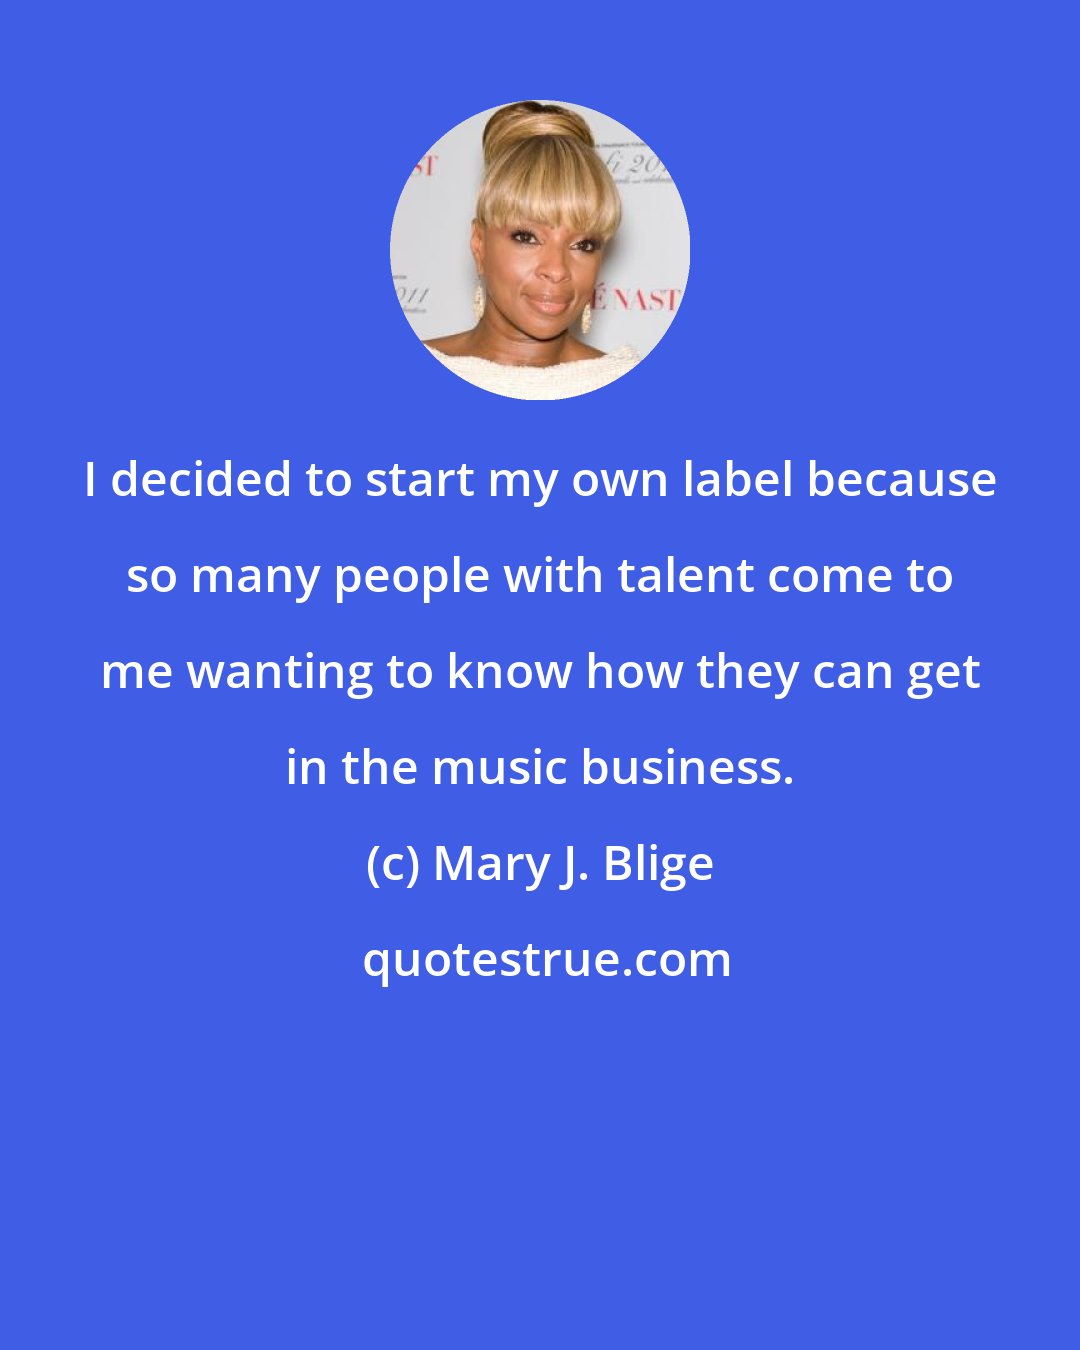 Mary J. Blige: I decided to start my own label because so many people with talent come to me wanting to know how they can get in the music business.